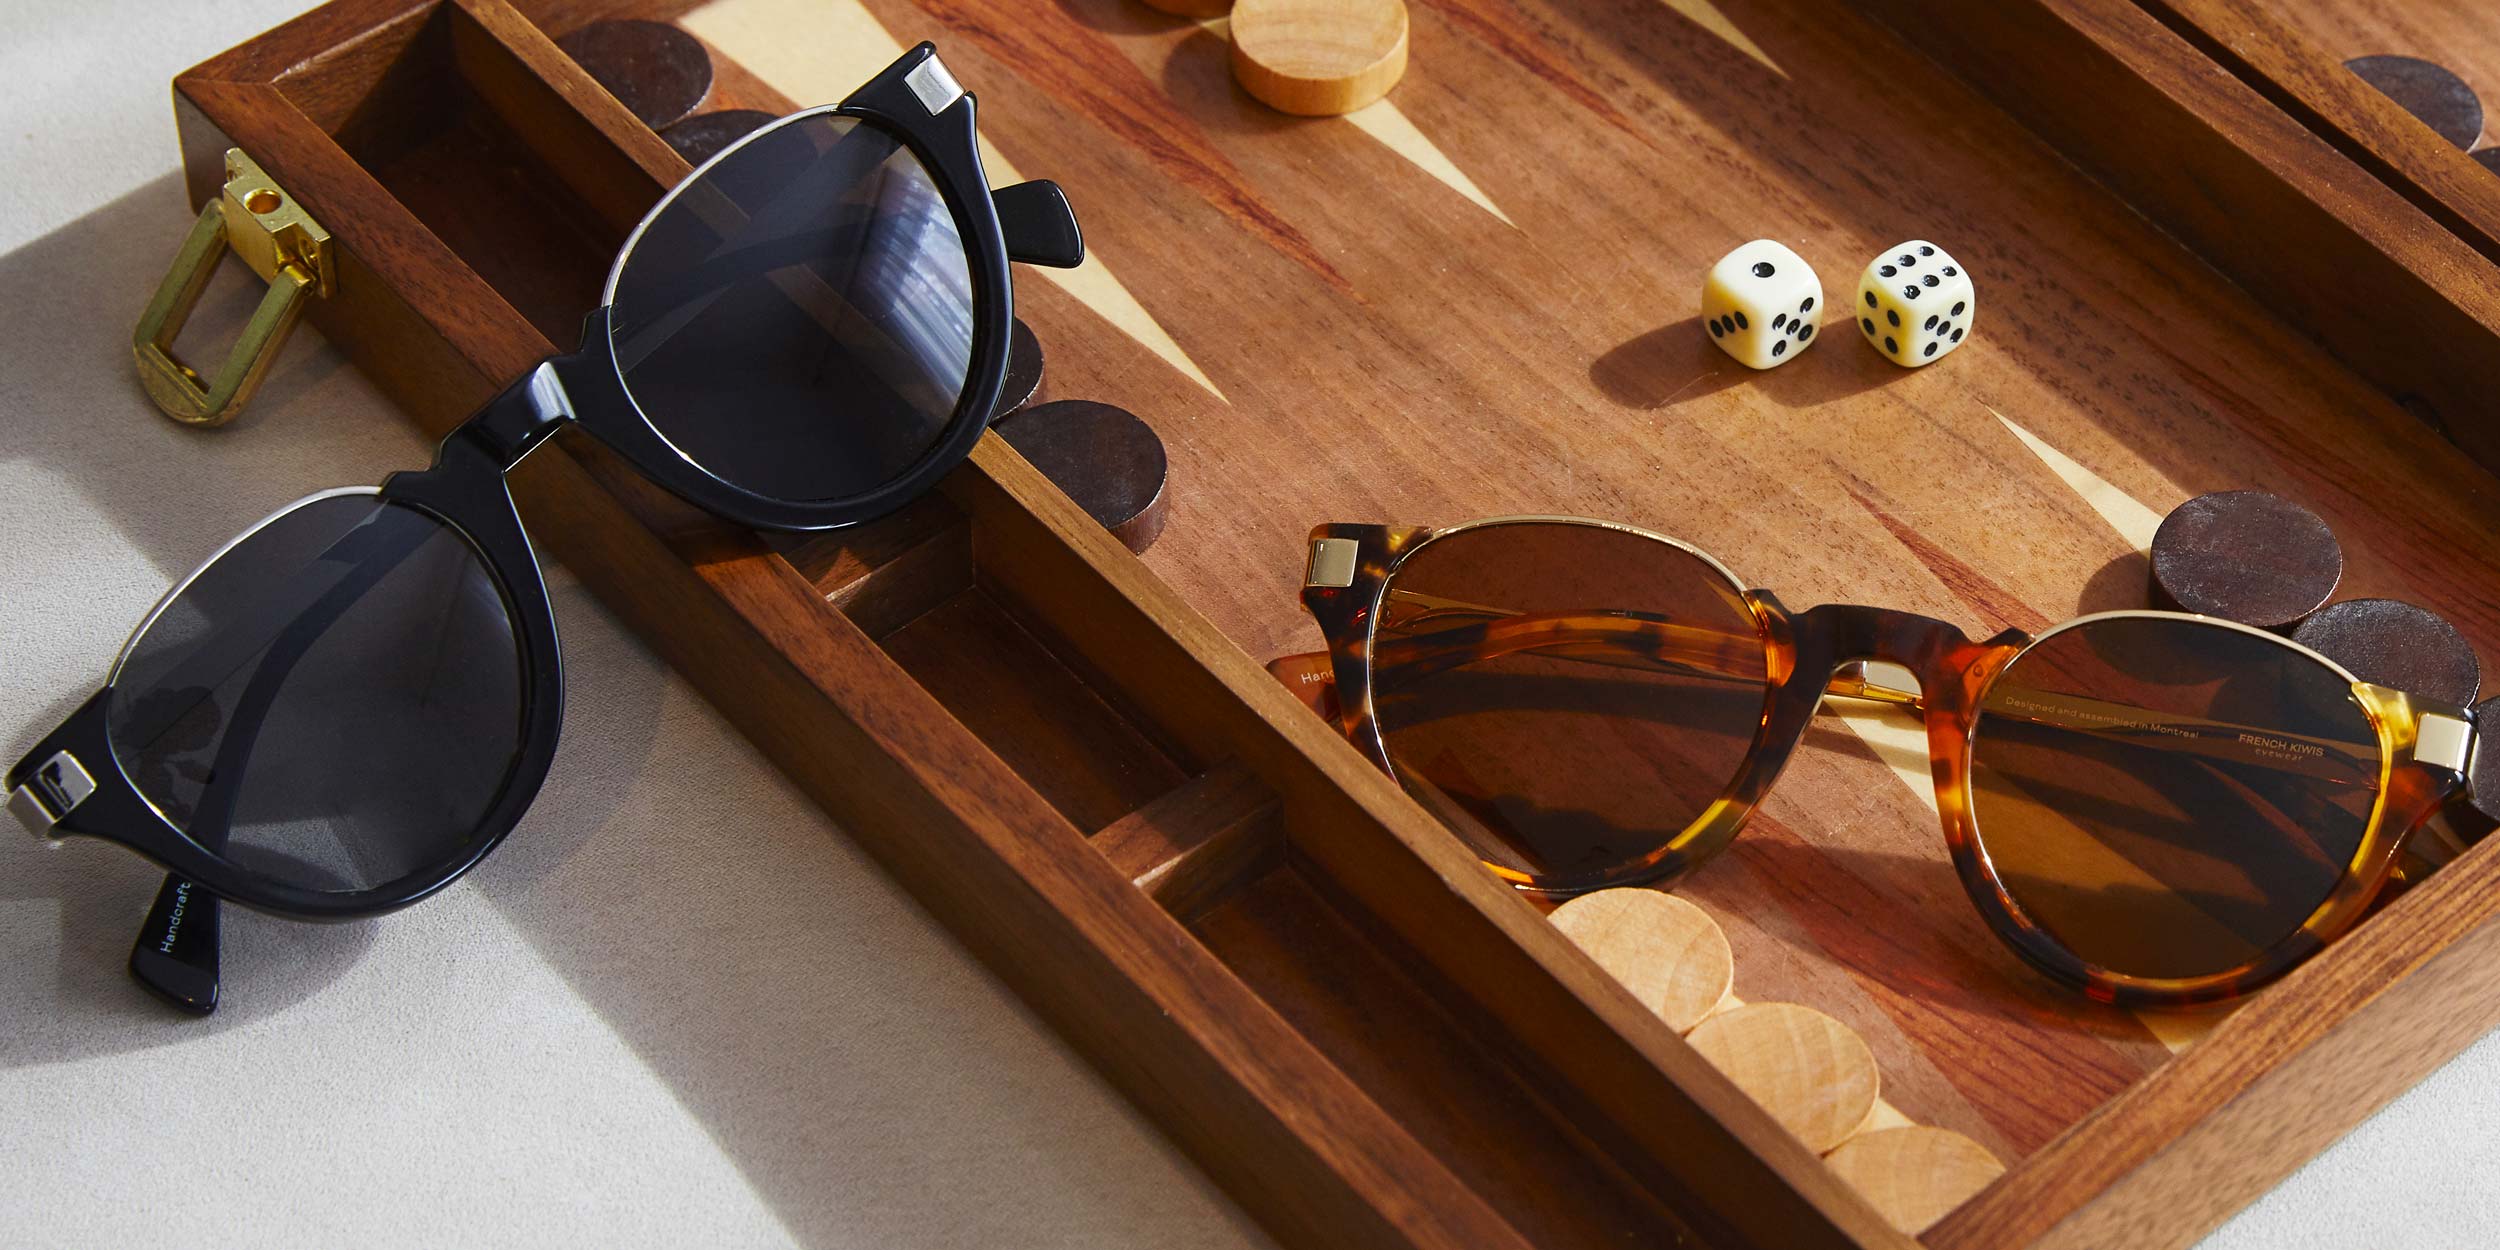 Photo Details of Charlie Sun Tortoise & Gold Sun Glasses in a room